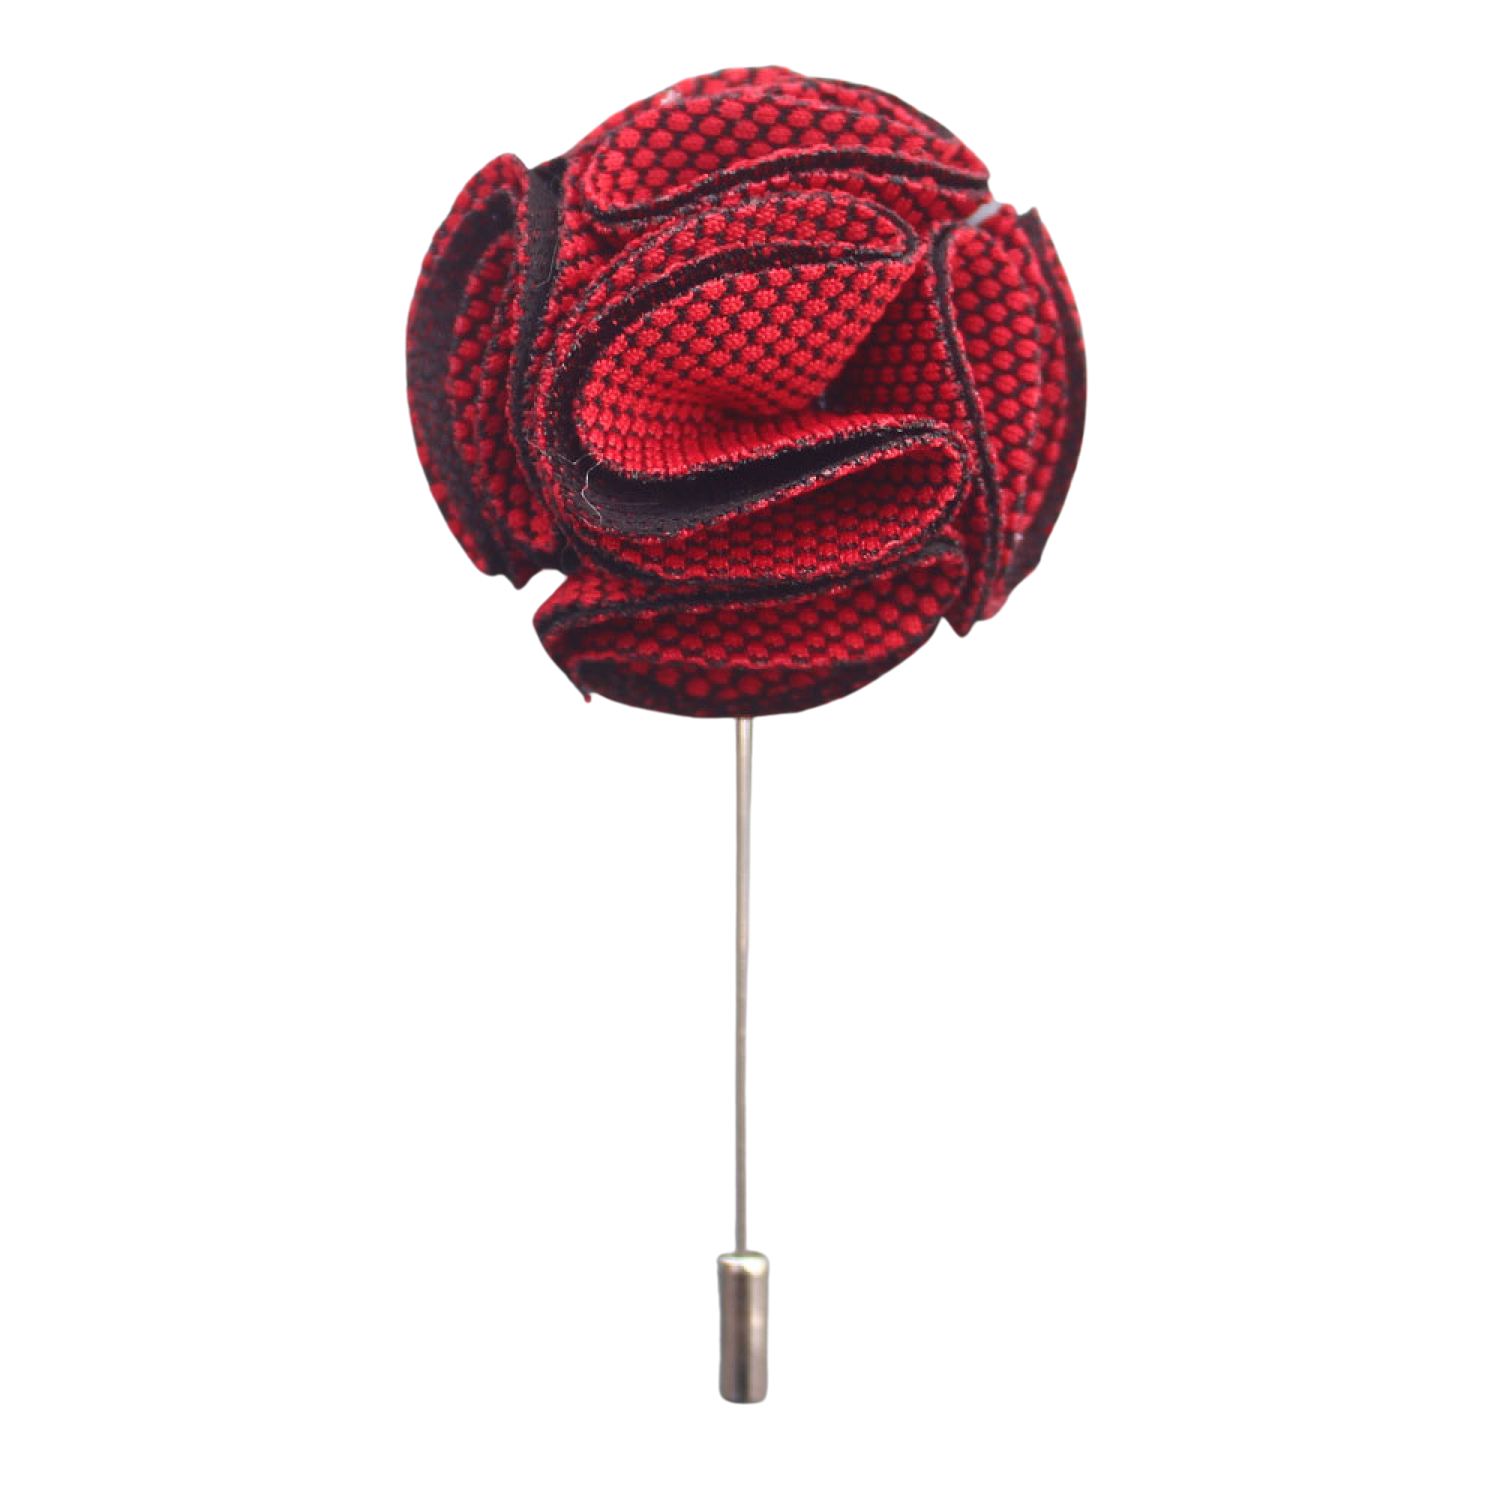 A Bright Red Textured Burst Lapel Pin||Bright Red